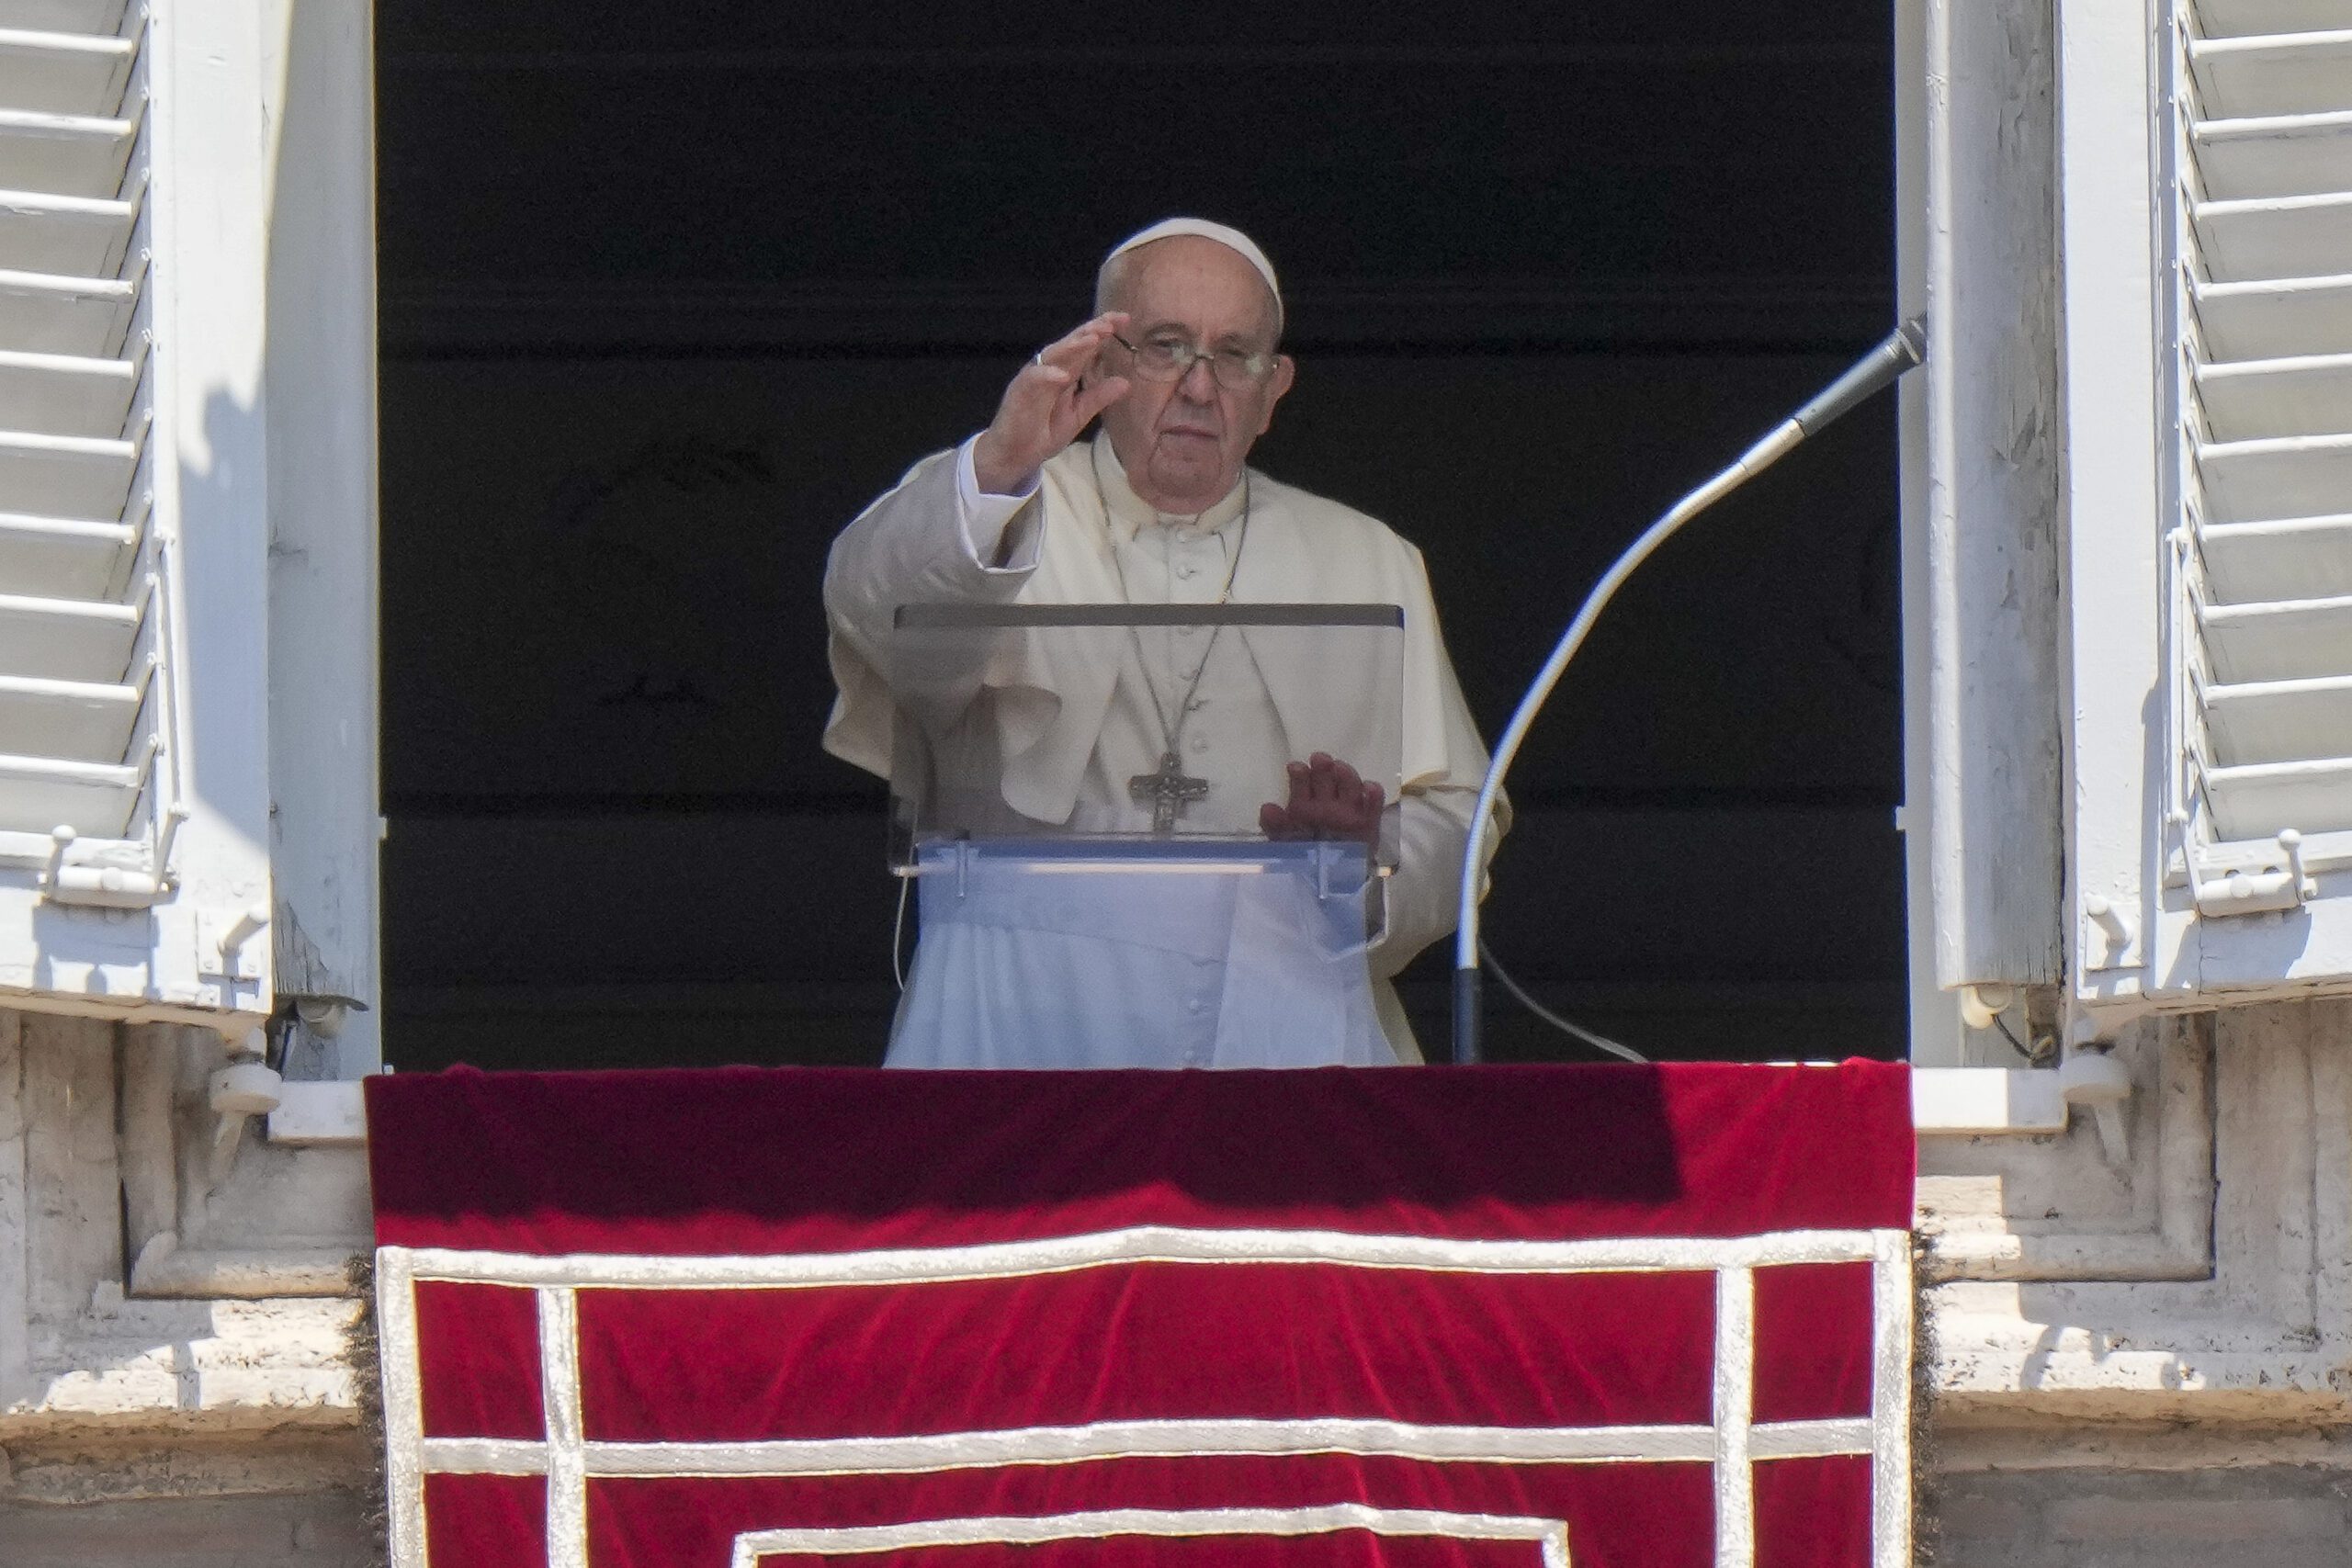 Pope Francis delivers his blessing as he recites the Angelus noon prayer from the window of his studio overlooking St.Peter's Square, at the Vatican, Sunday, July 17, 2022. (AP Photo/Andrew Medichini)